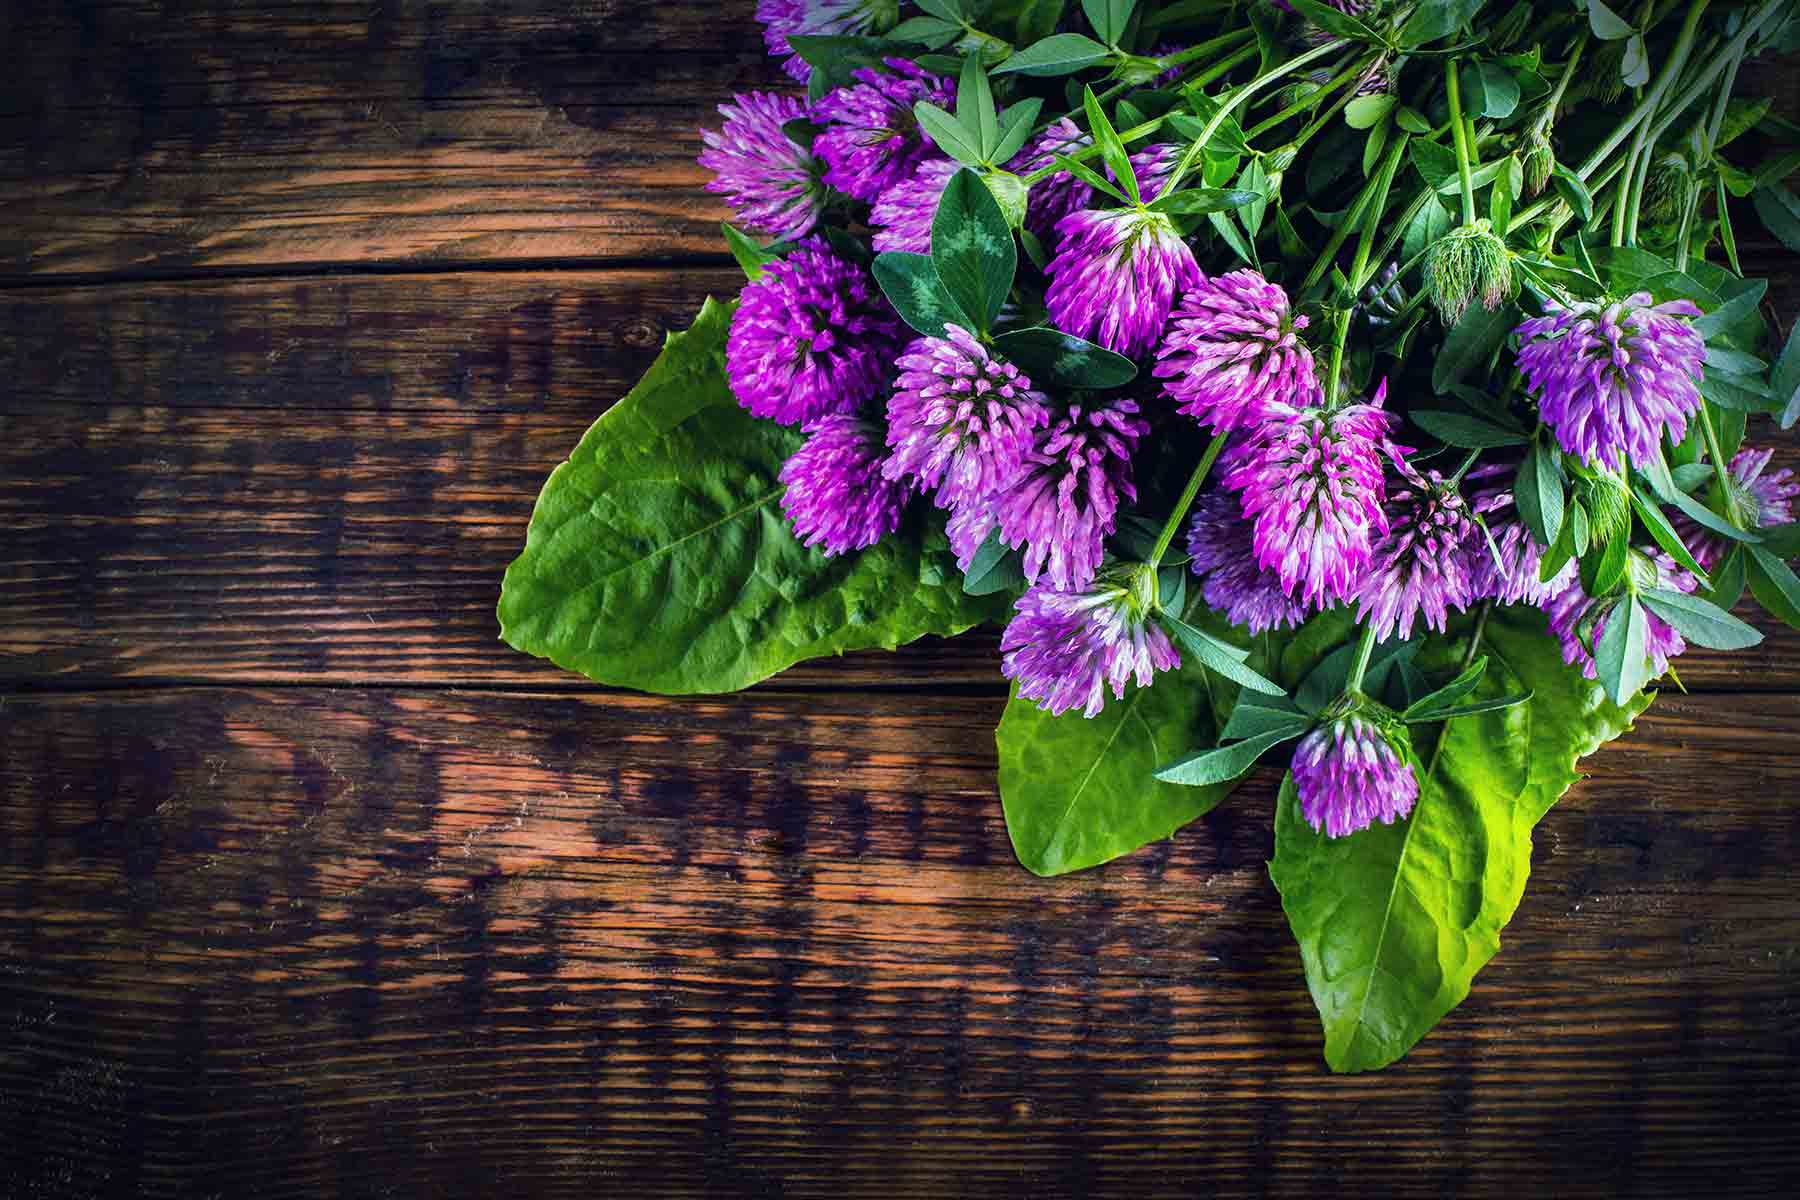 The Medicinal Uses and Health Benefits of Red Clover